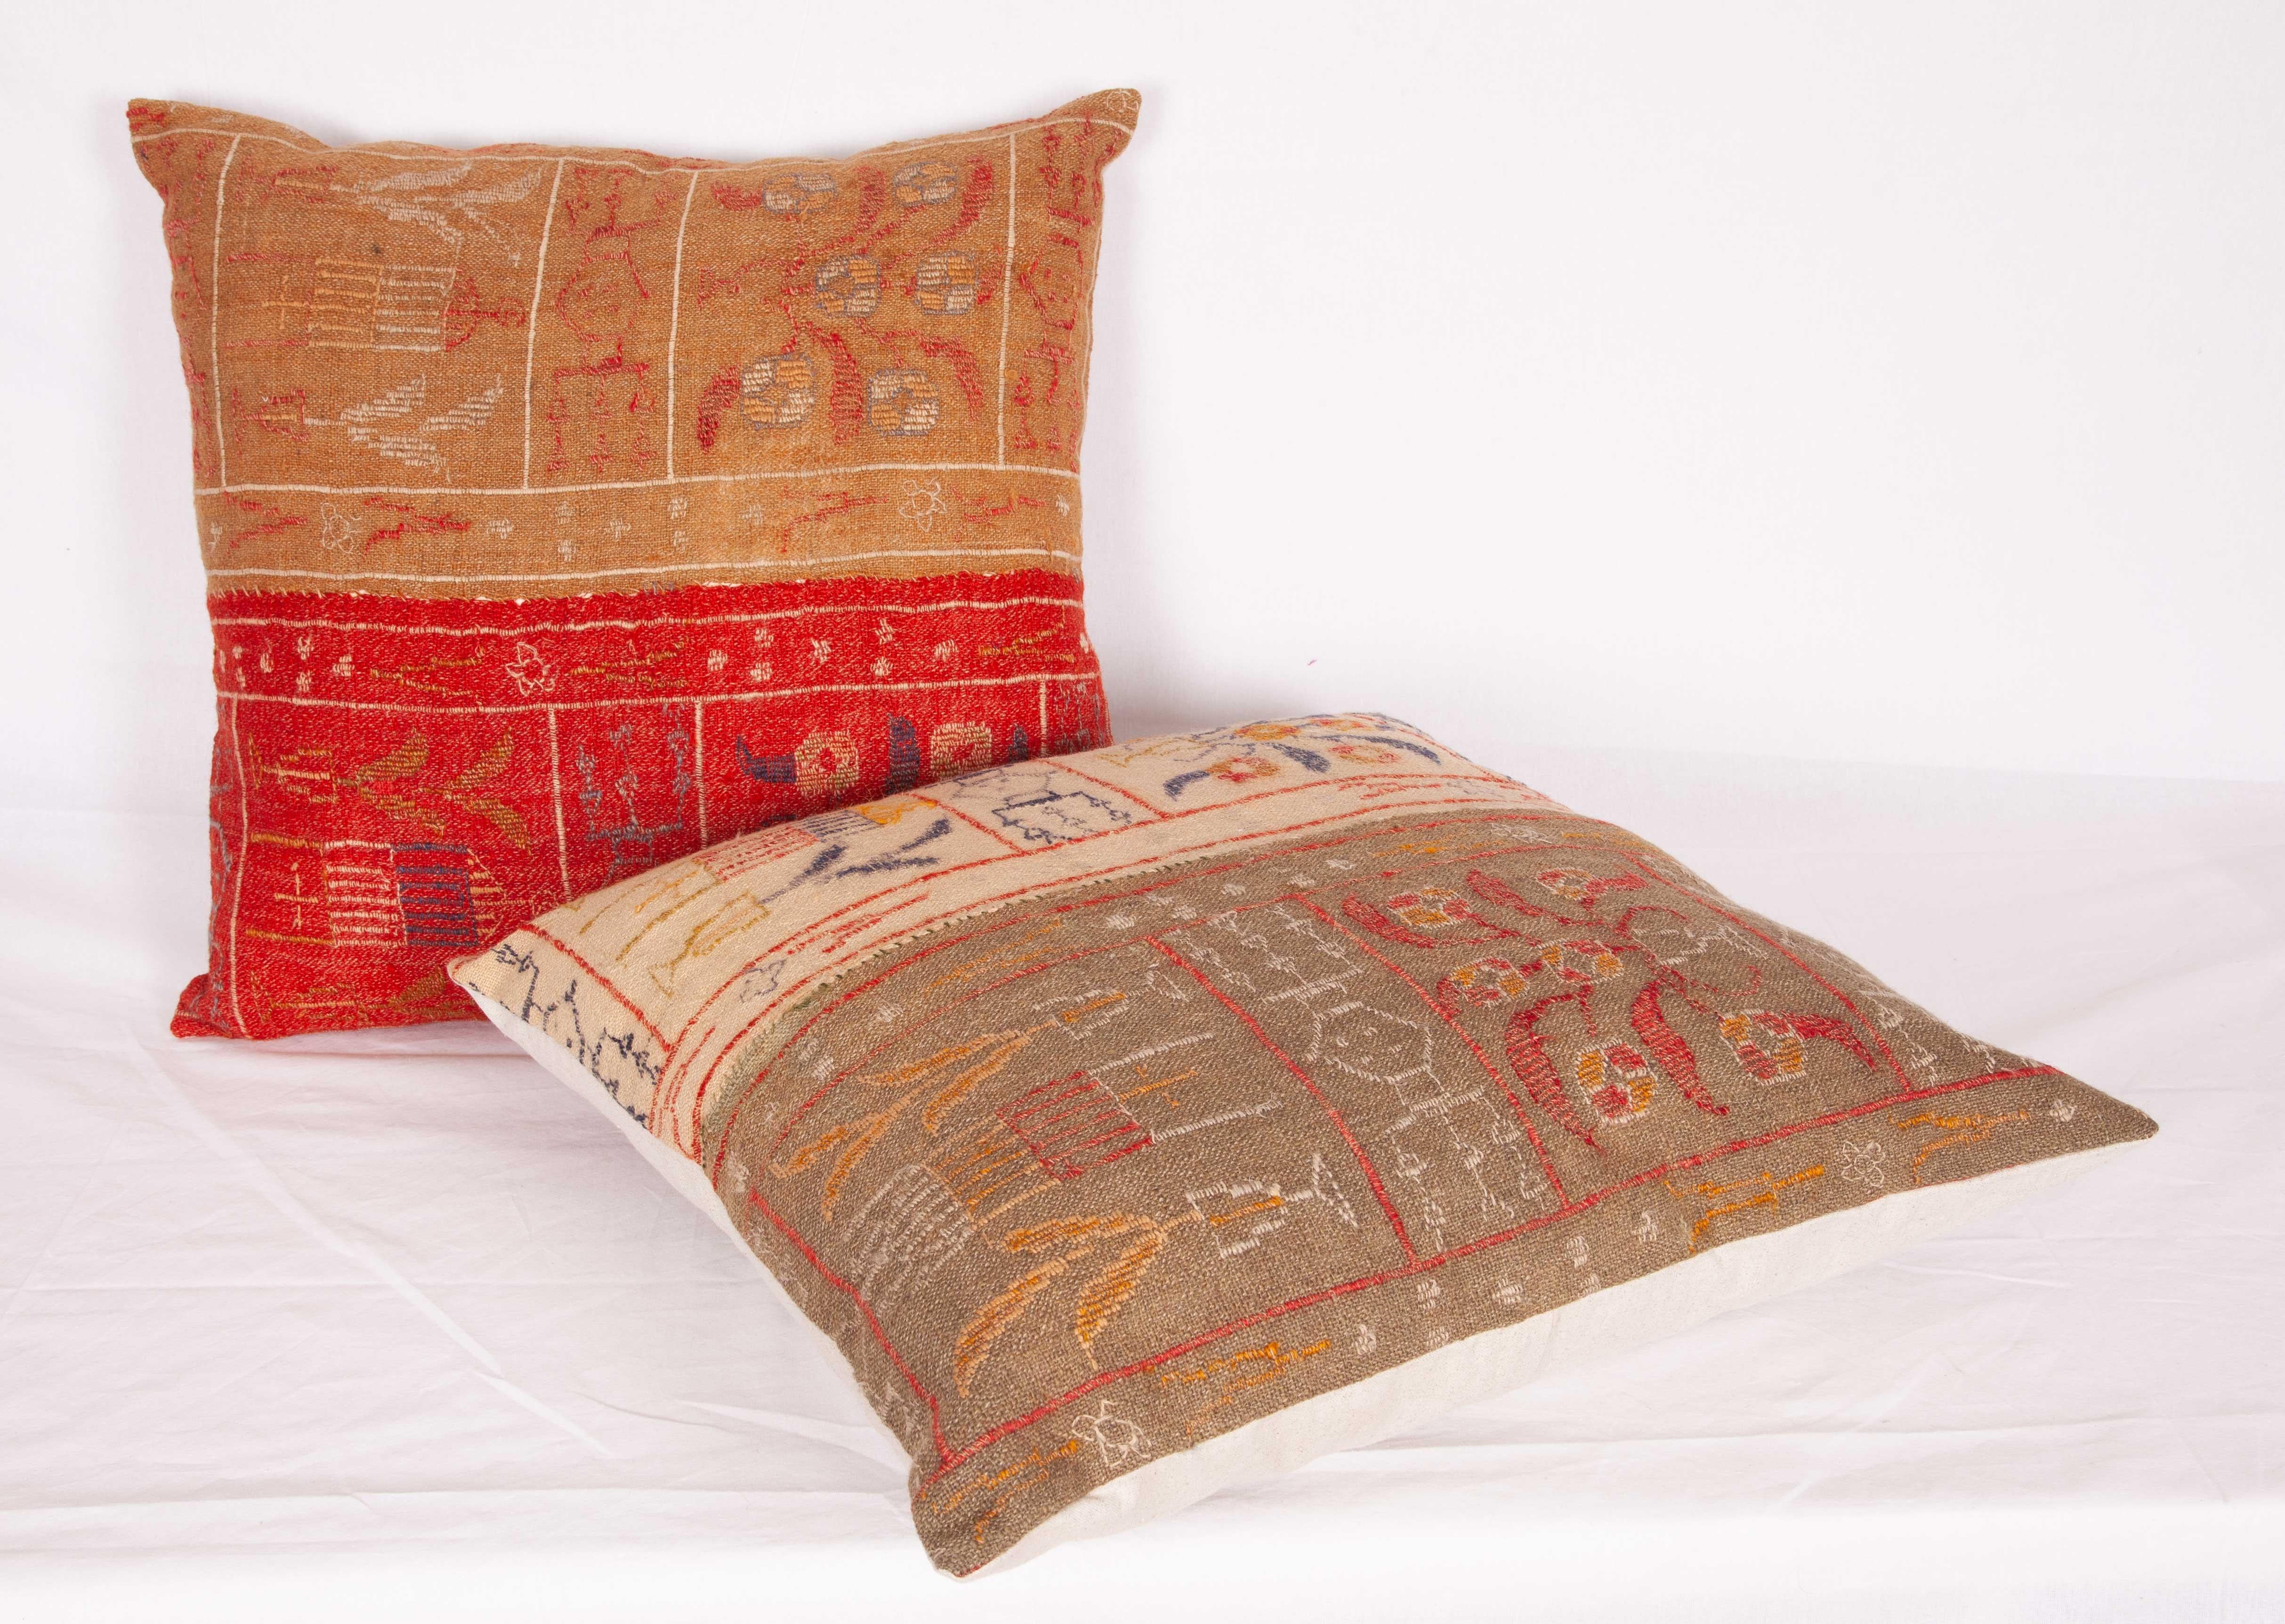 20th Century Kilim Pillow Cases Fashioned from a South East Anatolian Kilim